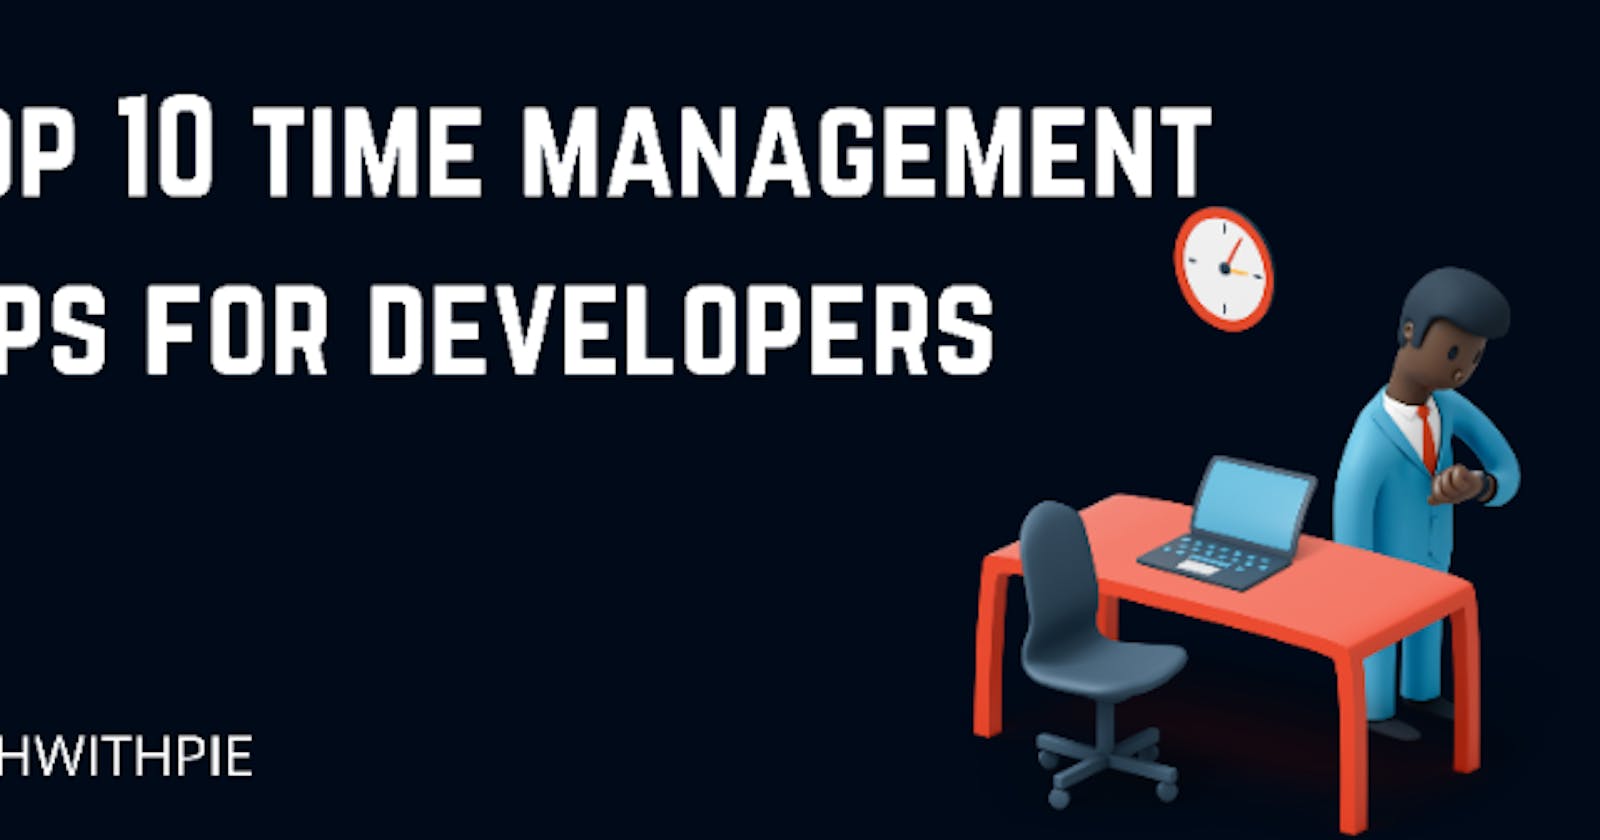 Top 10 time management tips for developers 2022